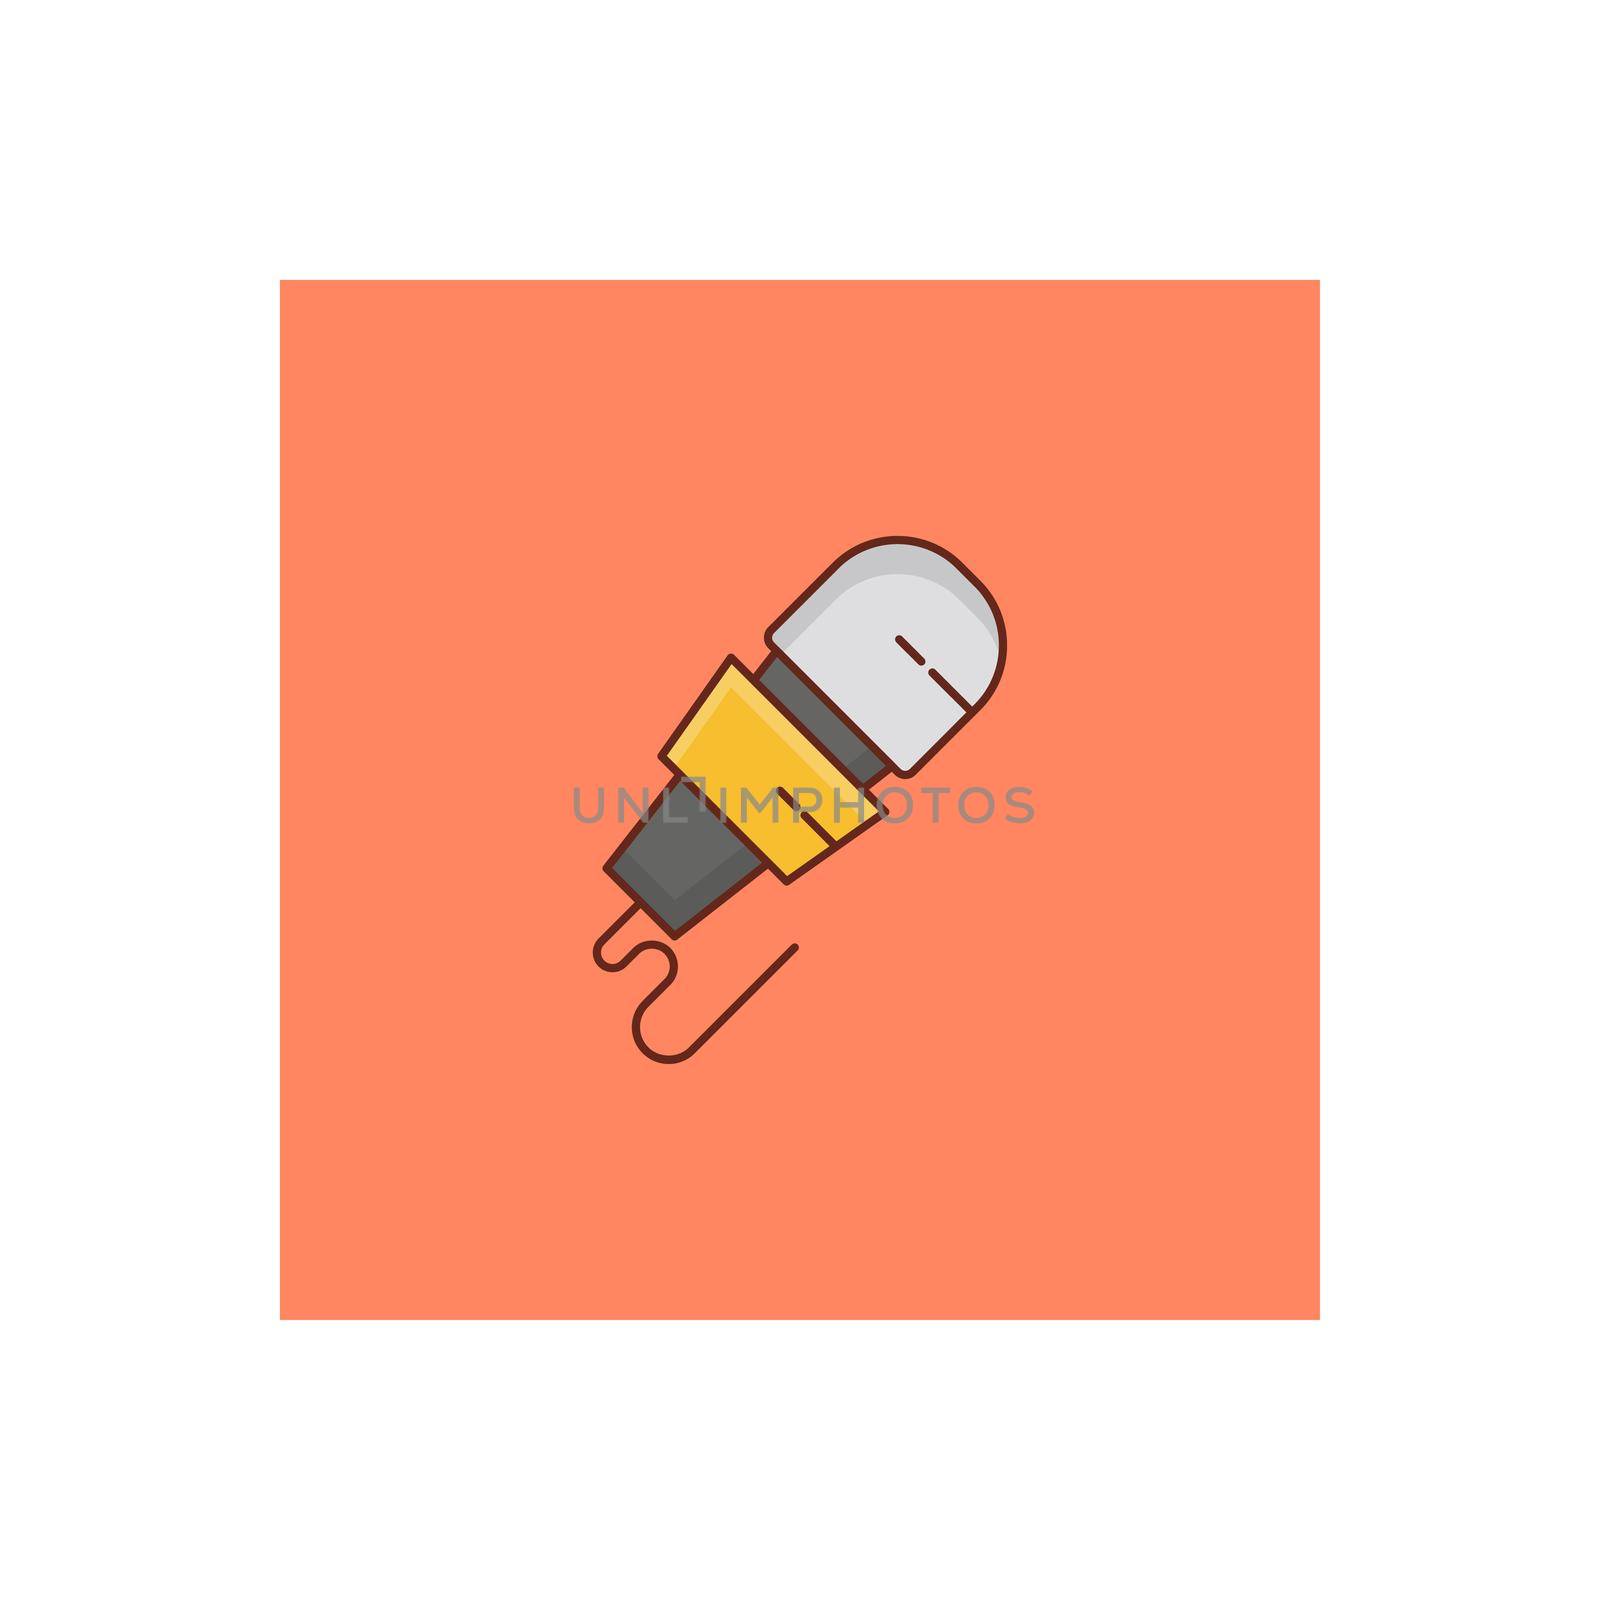 mic vector flat color icon